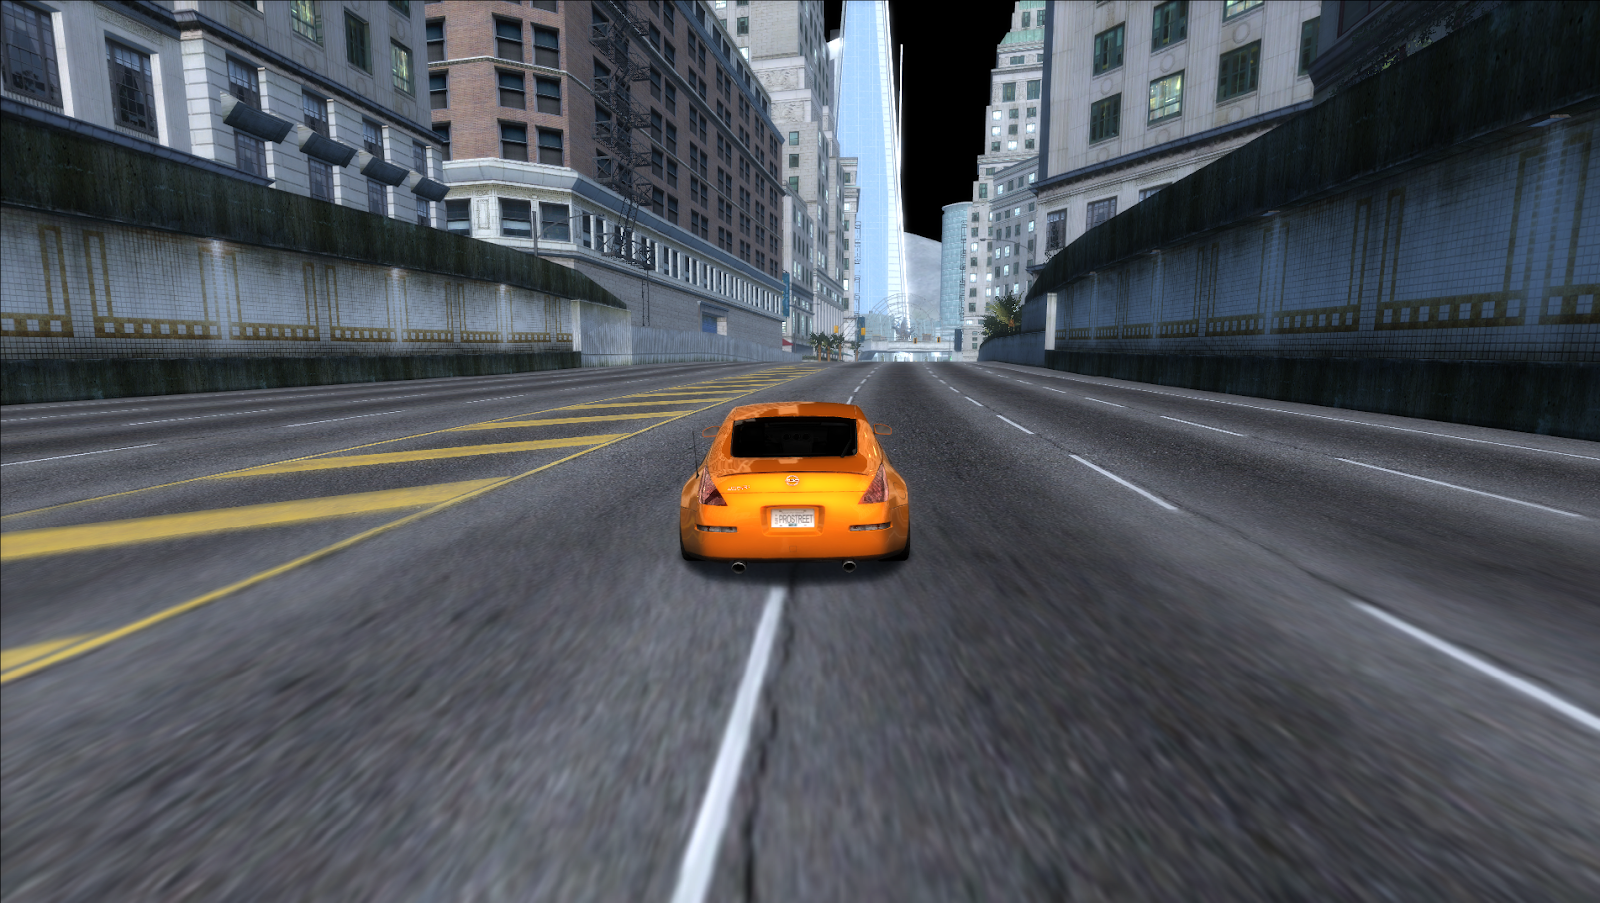 NFS Most Wanted - Palmont City v1.0 Released